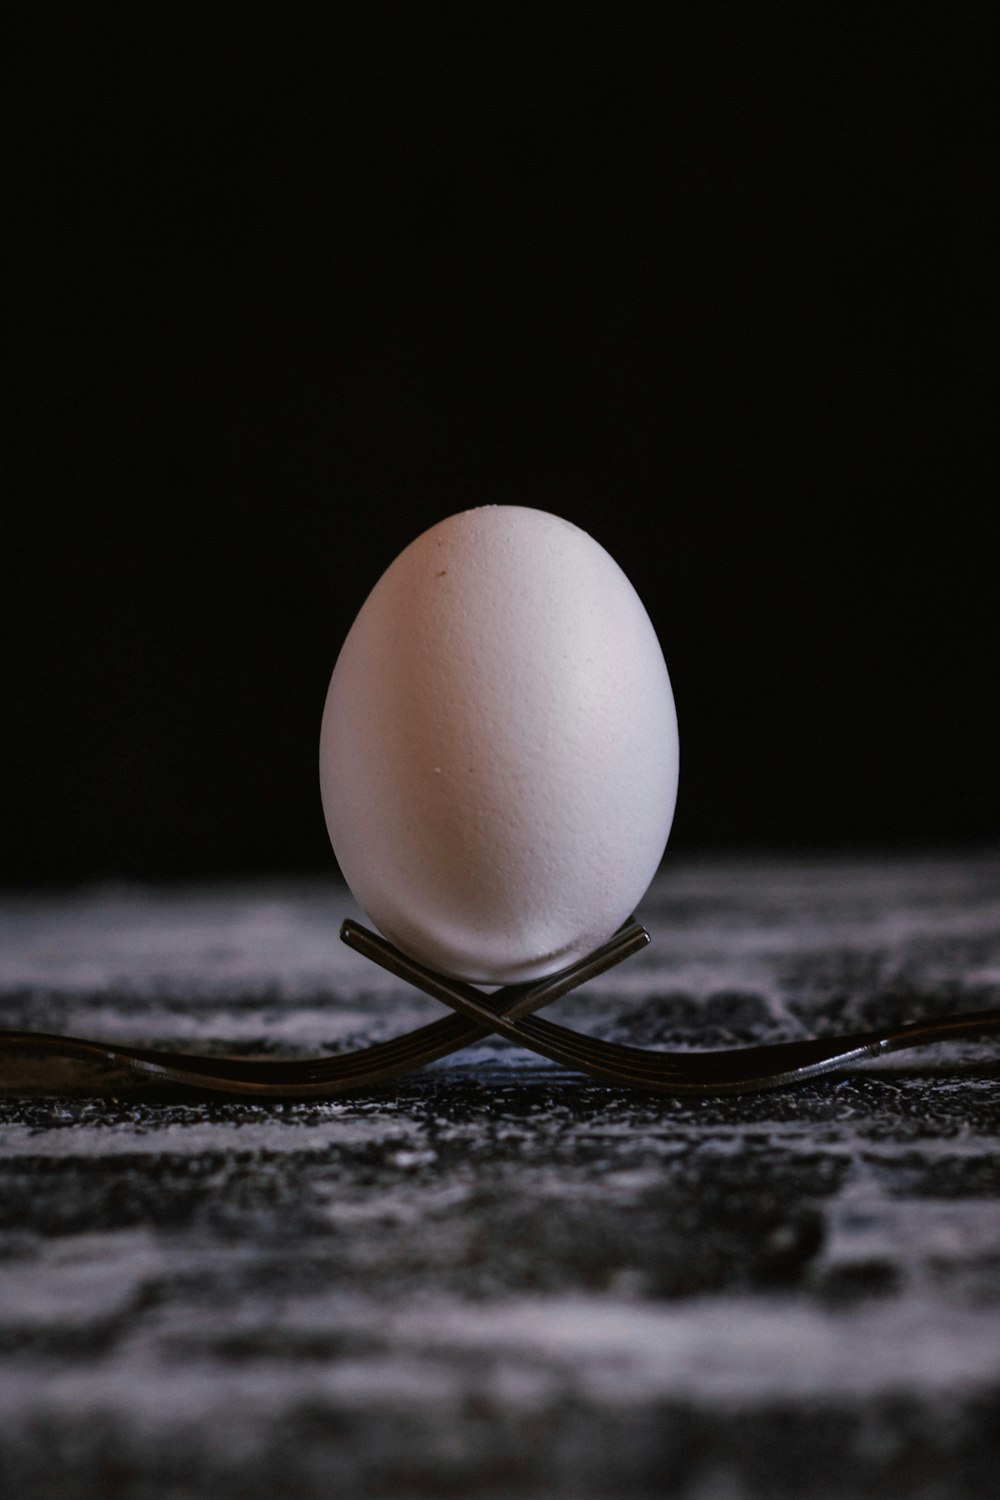 white egg on brown wooden table